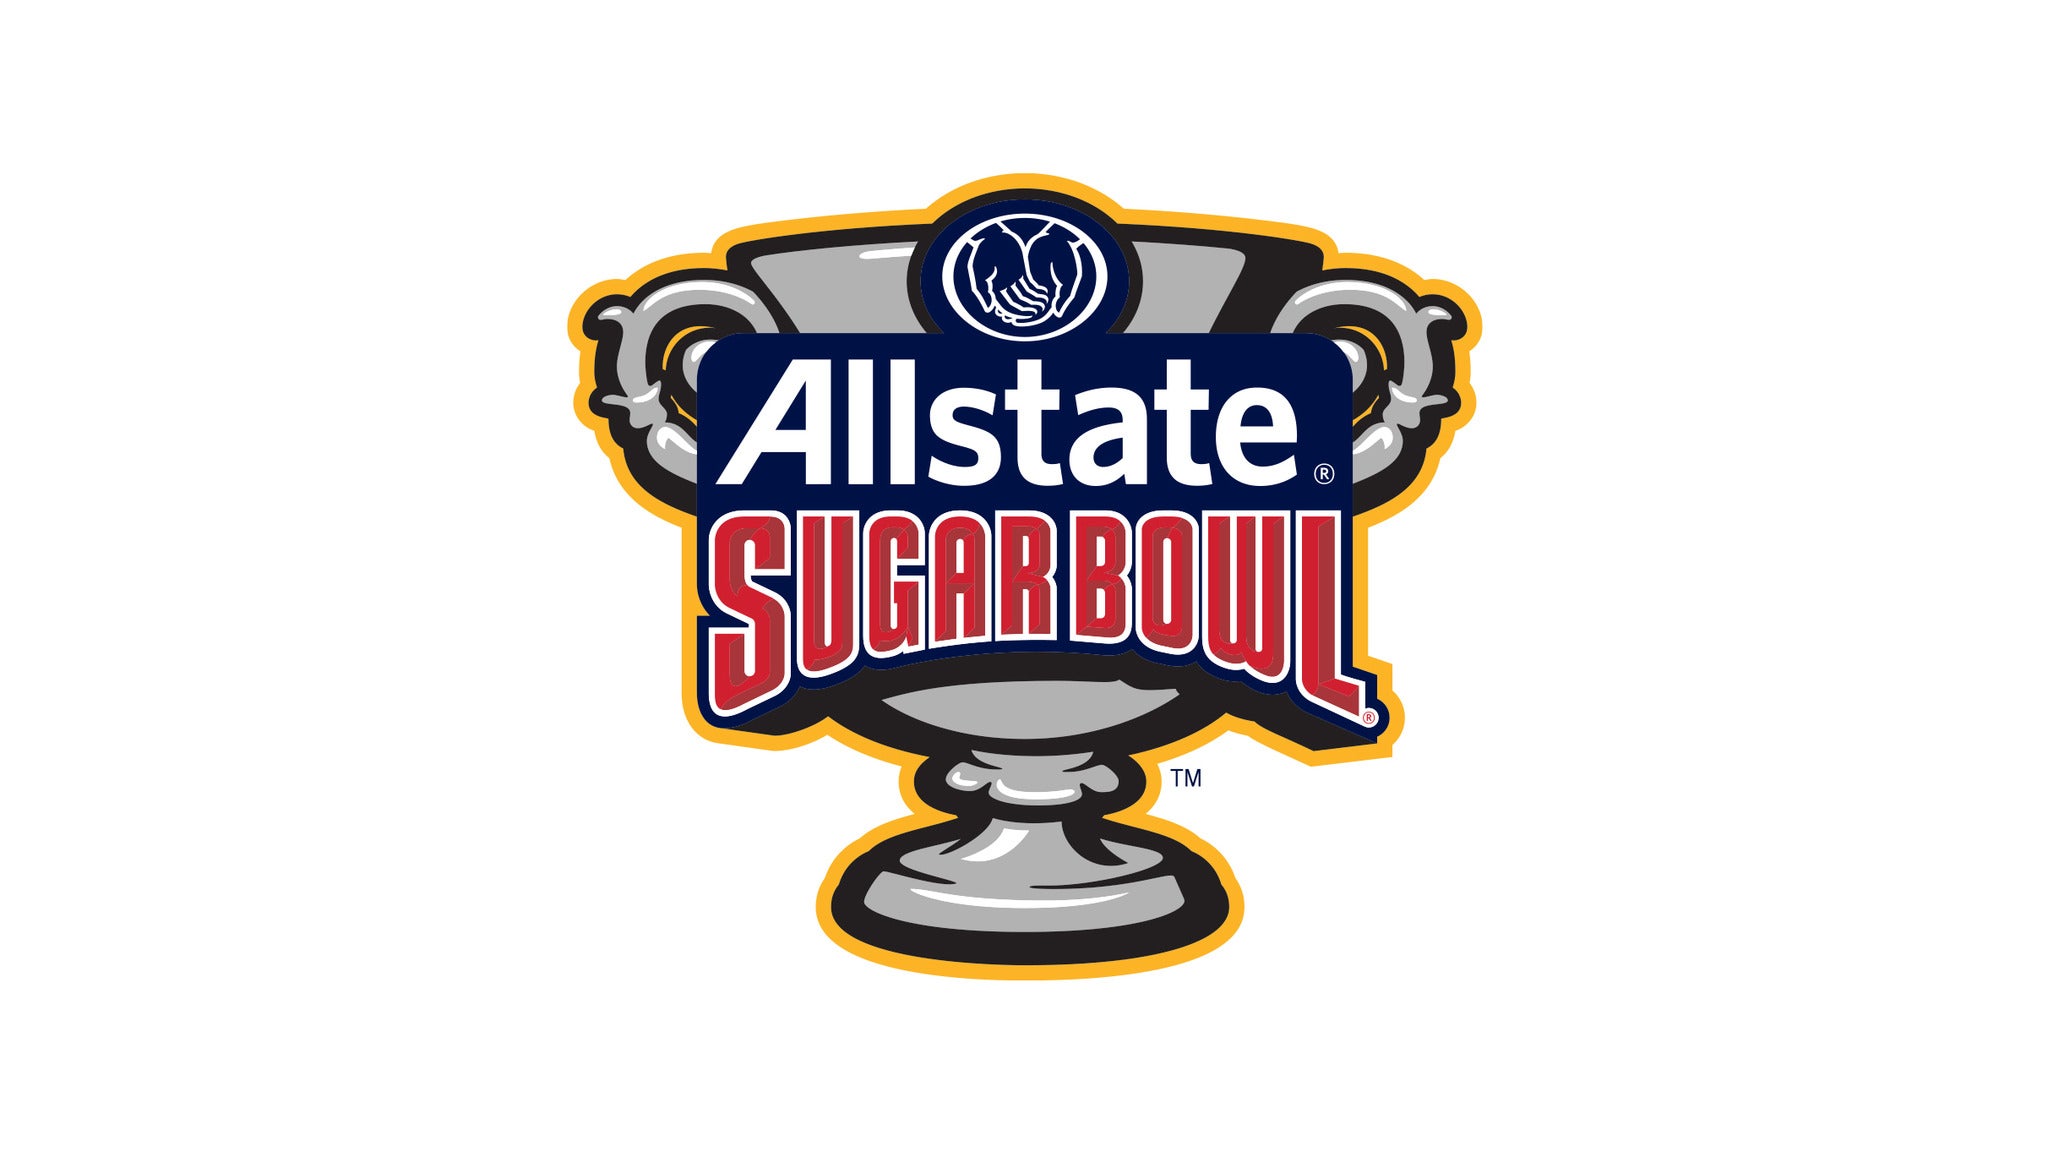 89th Annual Allstate Sugar Bowl presale password for early tickets in New Orleans